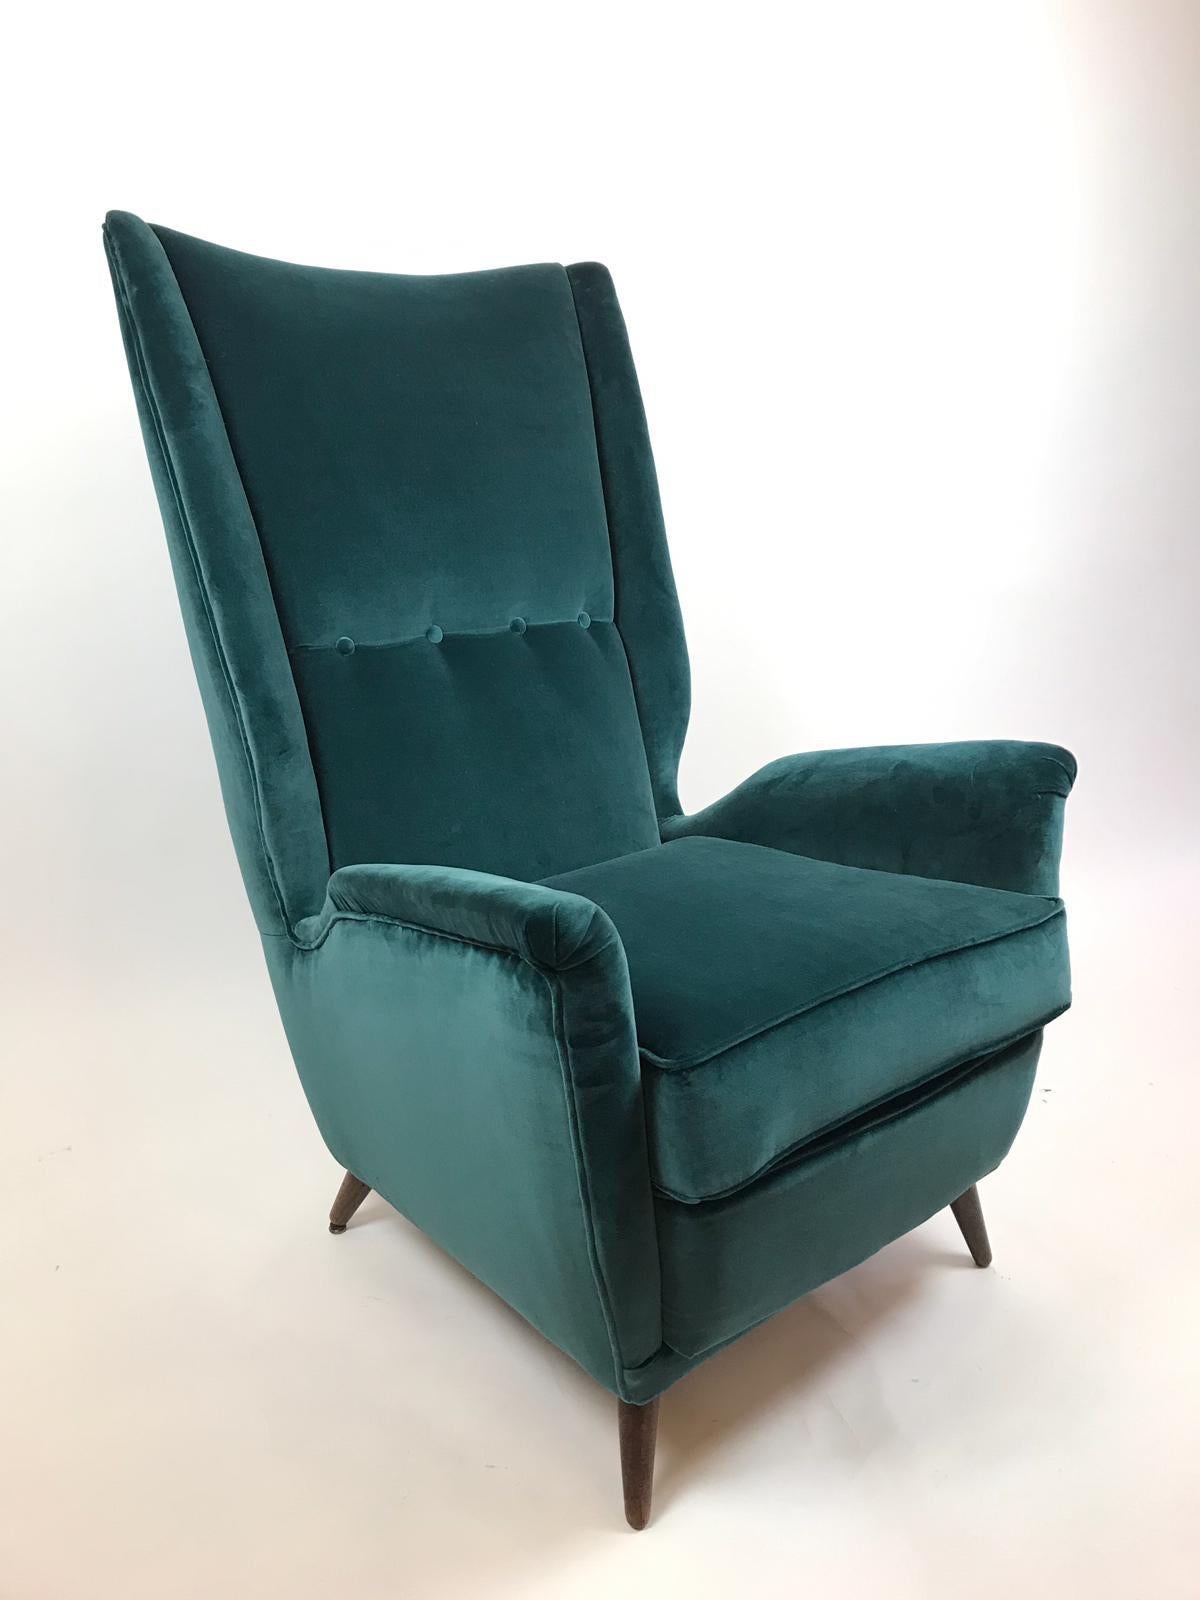 Hand-Crafted Gio Ponti Pair of High Back Armchairs Newly Upholstered in Teal Velvet